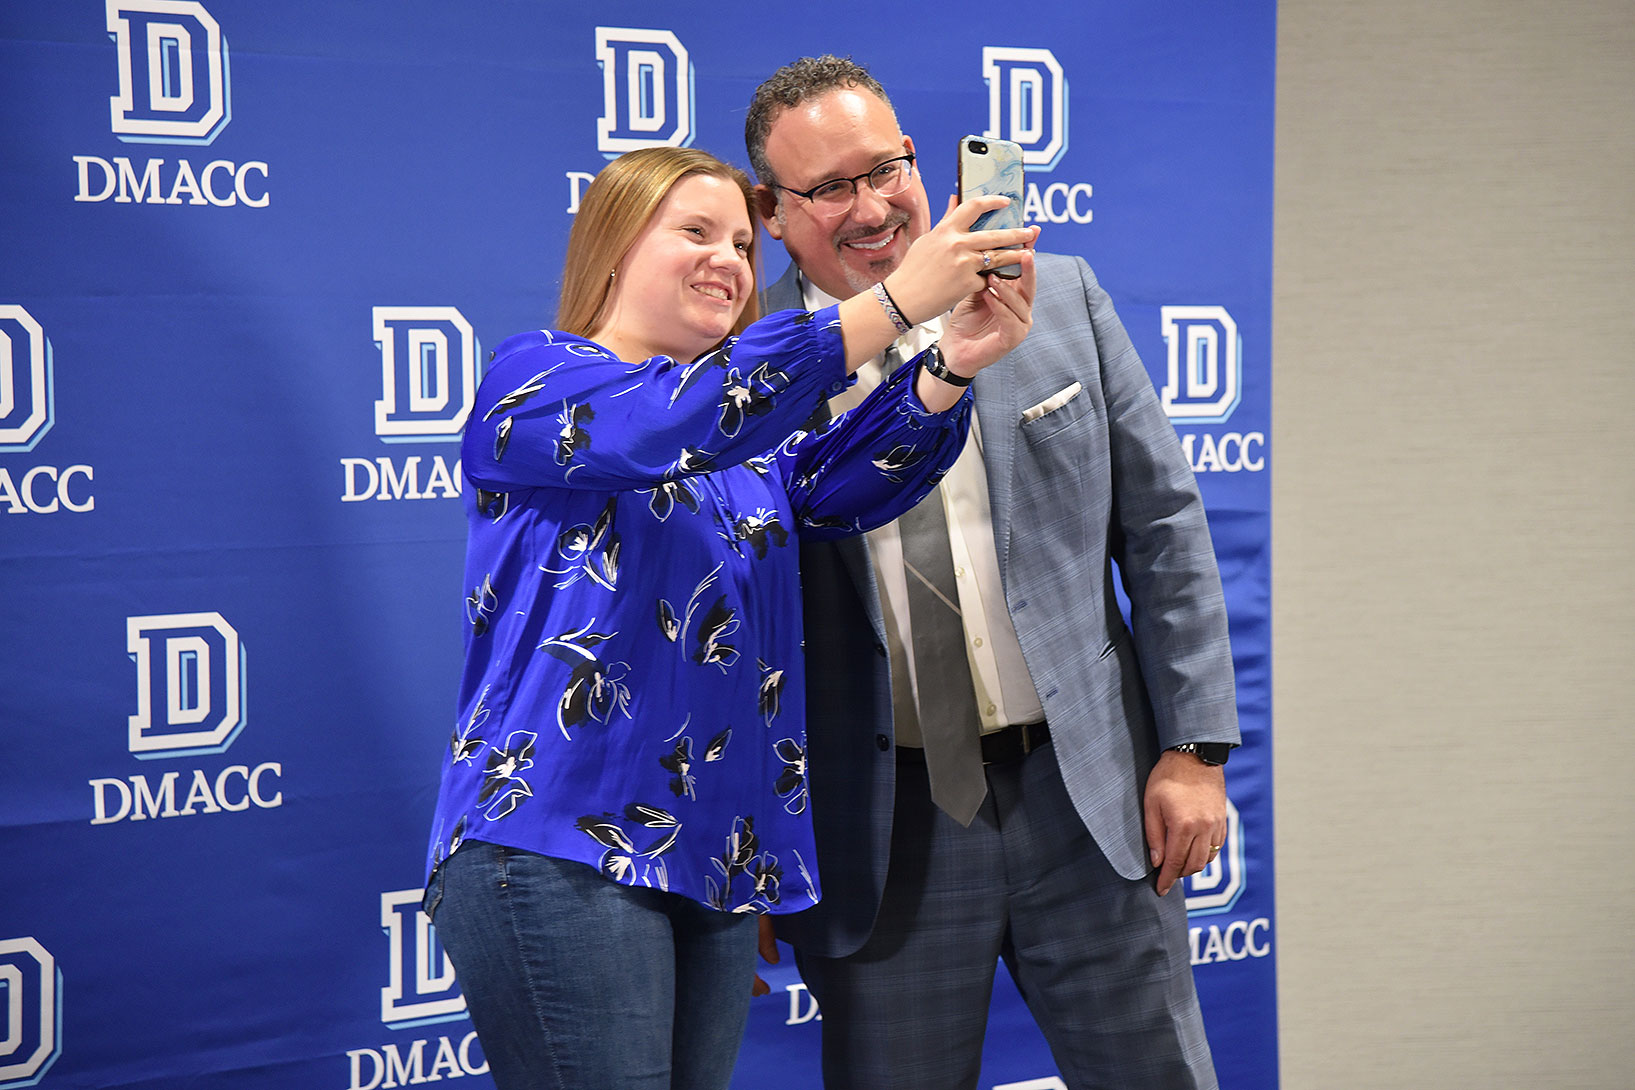 Second-year DMACC Education student Ariana Gray (left) of Urbandale takes a selfie with U.S. Secretary of Education Dr. Miguel Cardona​ on Dec. 7, 2023, at the DMACC Ankeny Campus. Gray, who is working toward an elementary education degree, participated in a student panel with Dr. Cardona during his visit to the College.   "The thing I'm most looking forward to as an educator is getting to experience the moments when a child connects with the information and understands what I'm trying to teach them," Gray said.